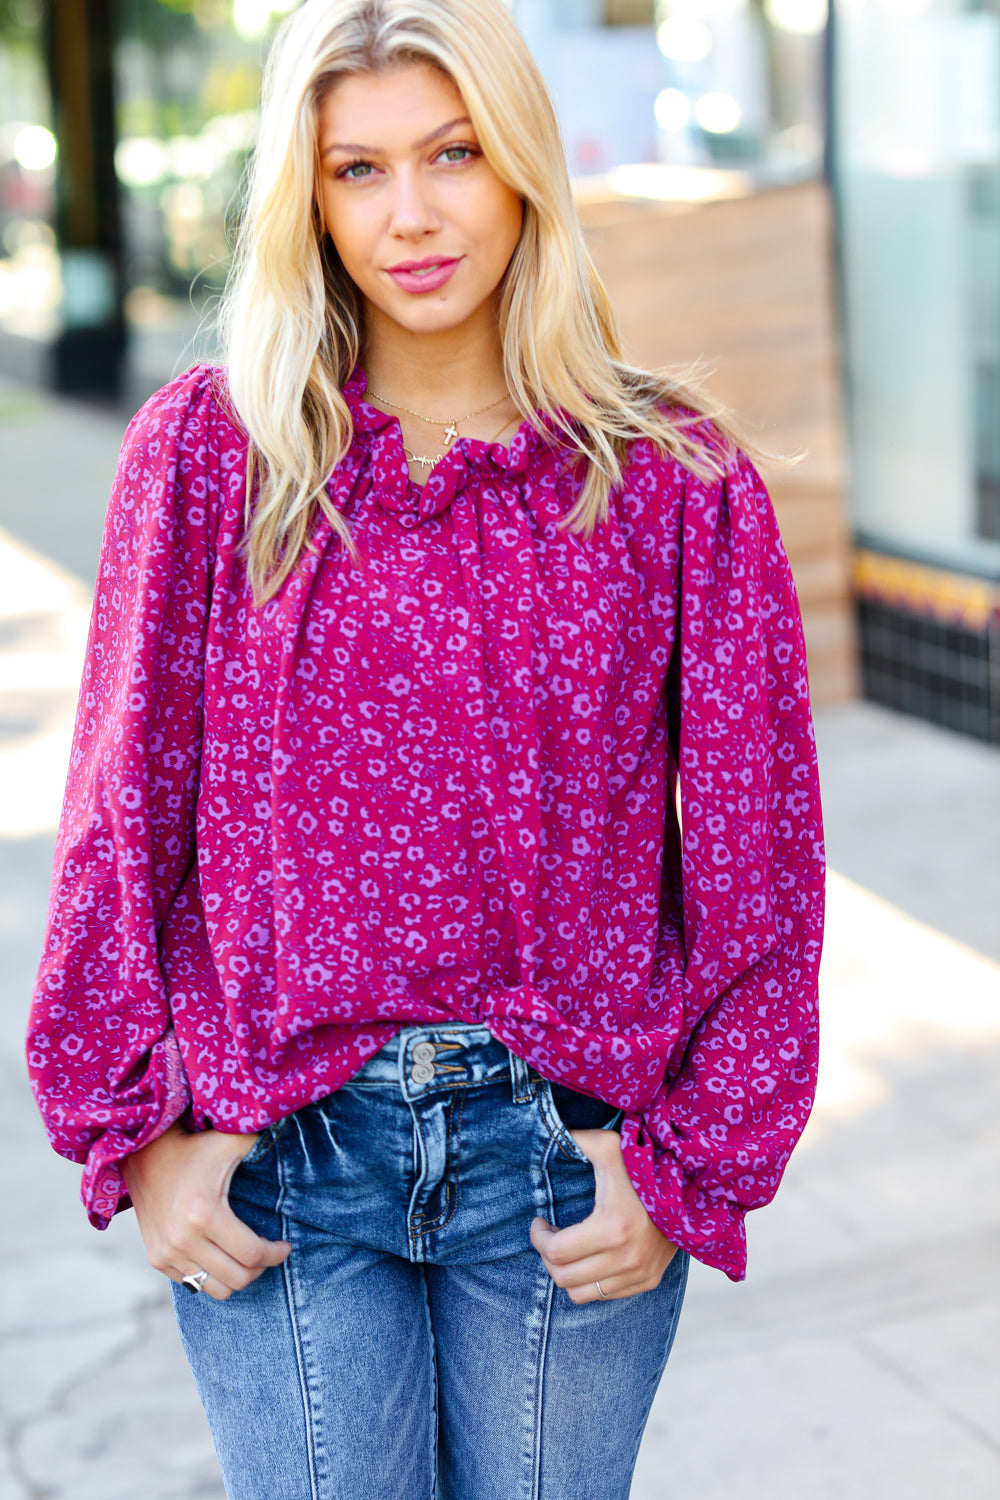 In Your Dreams Ditzy Floral Frill Neck Top